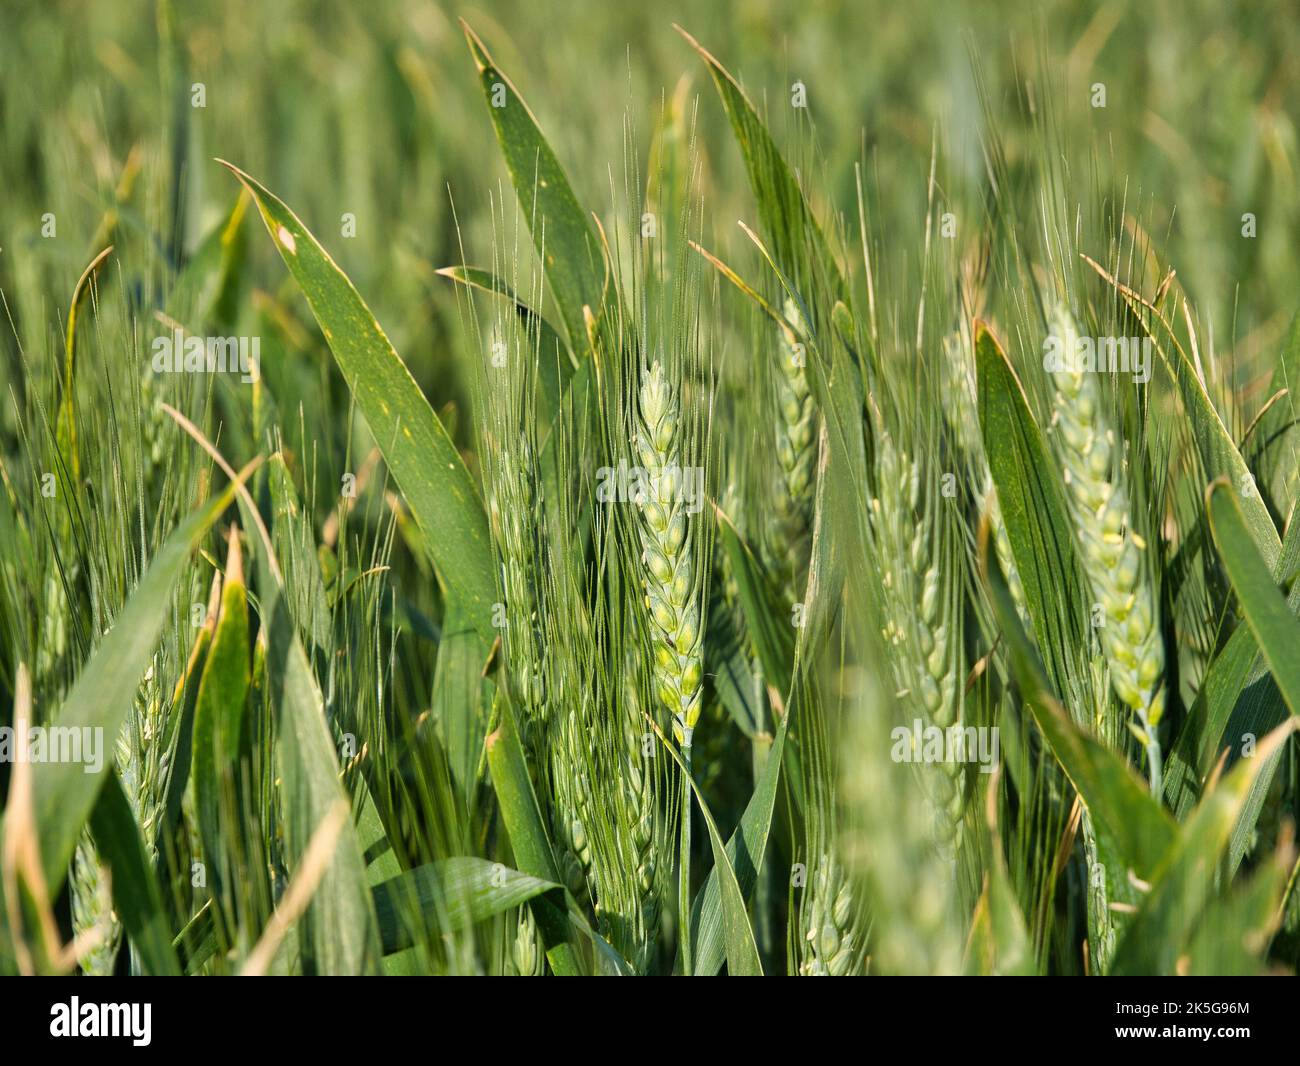 Closeup of an ear of growing wheat, with a narrow depth of field and blurred background. Stock Photo